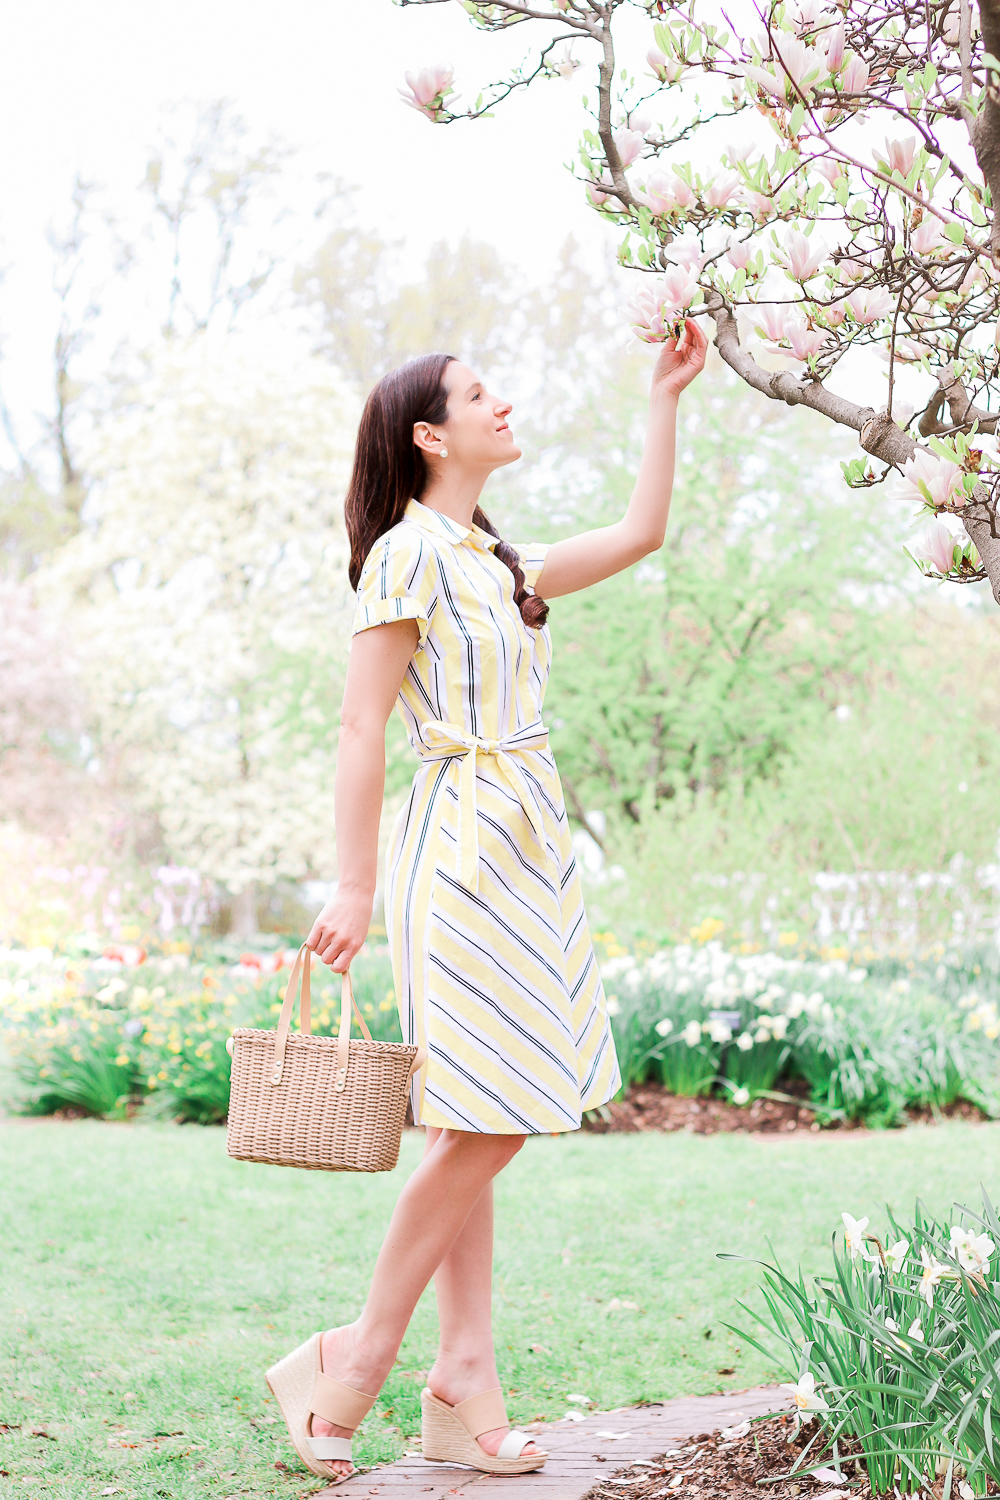 Target Spring Shopping Haul: Top Fashion and Beauty Finds by affordable fashion blogger Stephanie Ziajka from Diary of a Debutante, Target A New Day Yellow Striped Short Sleeve Shirtdress, Women's Adelina Espadrilles Slide Sandals, Basket Crossbody Bag